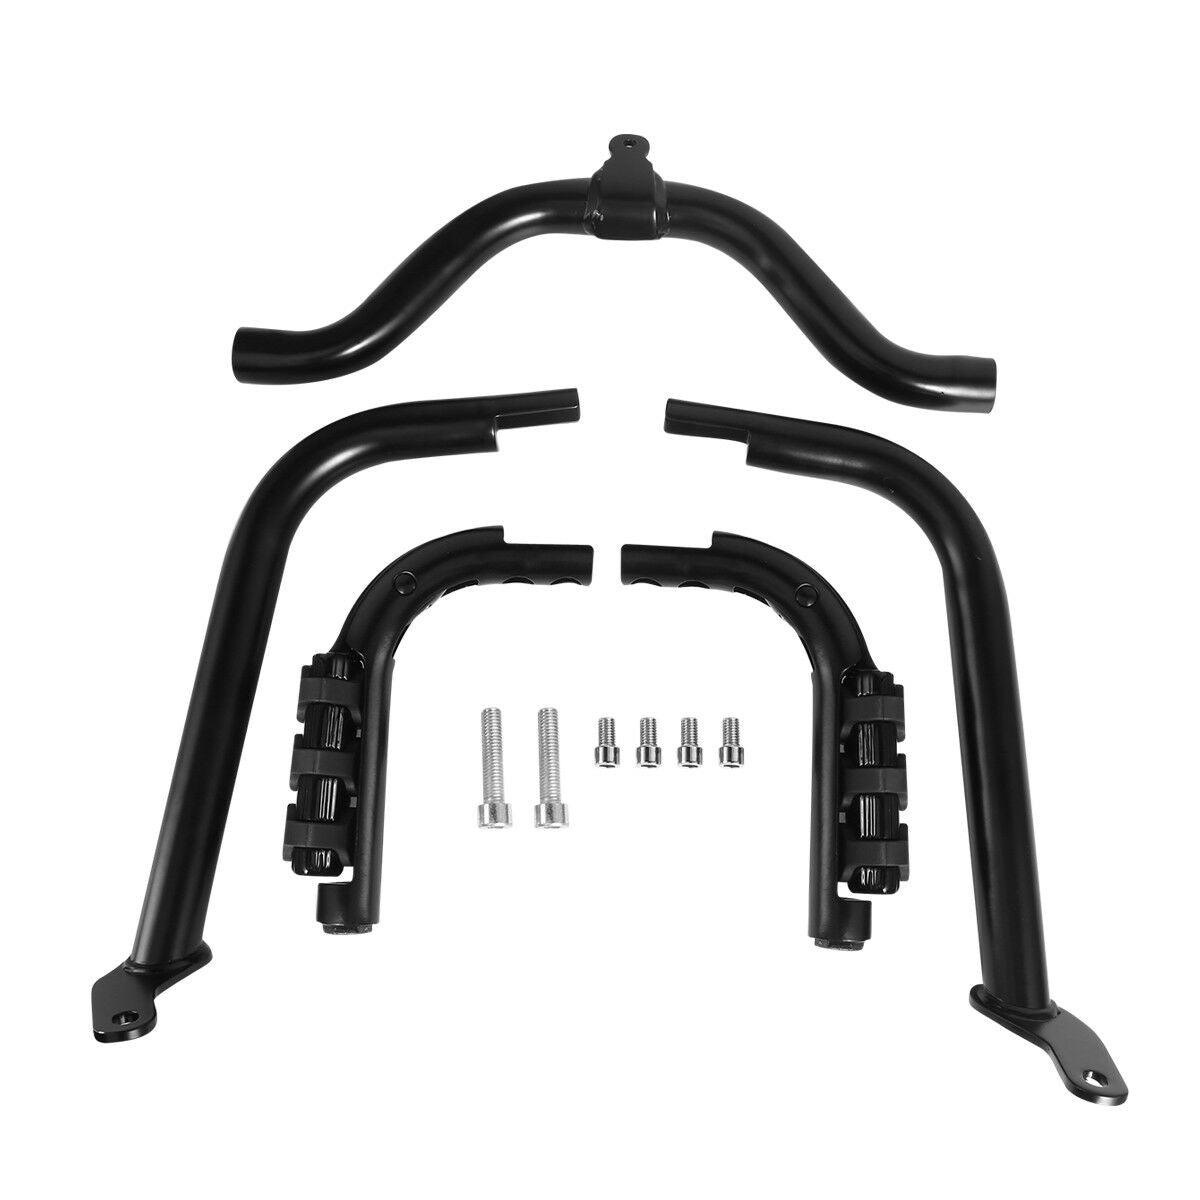 Black Engine Guard Highway Crash Bar & Footpegs Fit For Harley Touring 2014-2022 - Moto Life Products